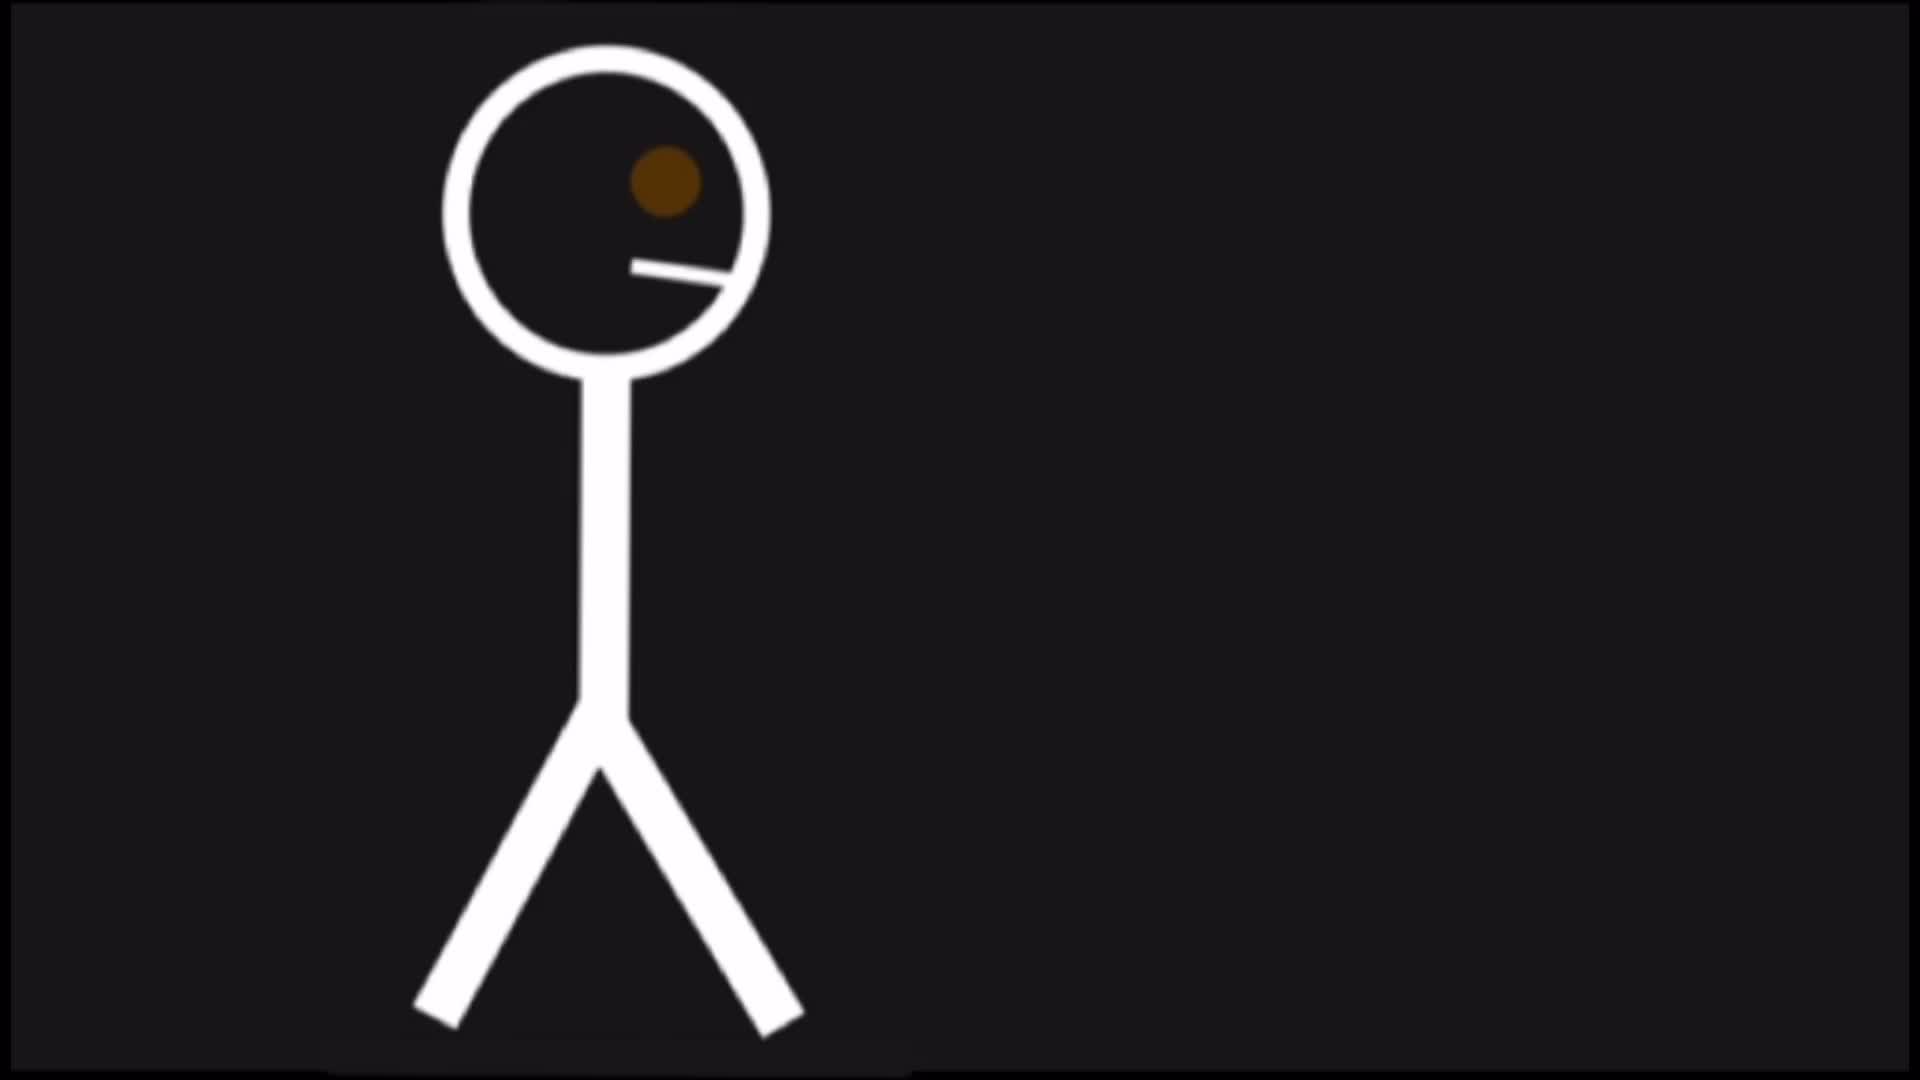 Stickman walking for about 69 seconds